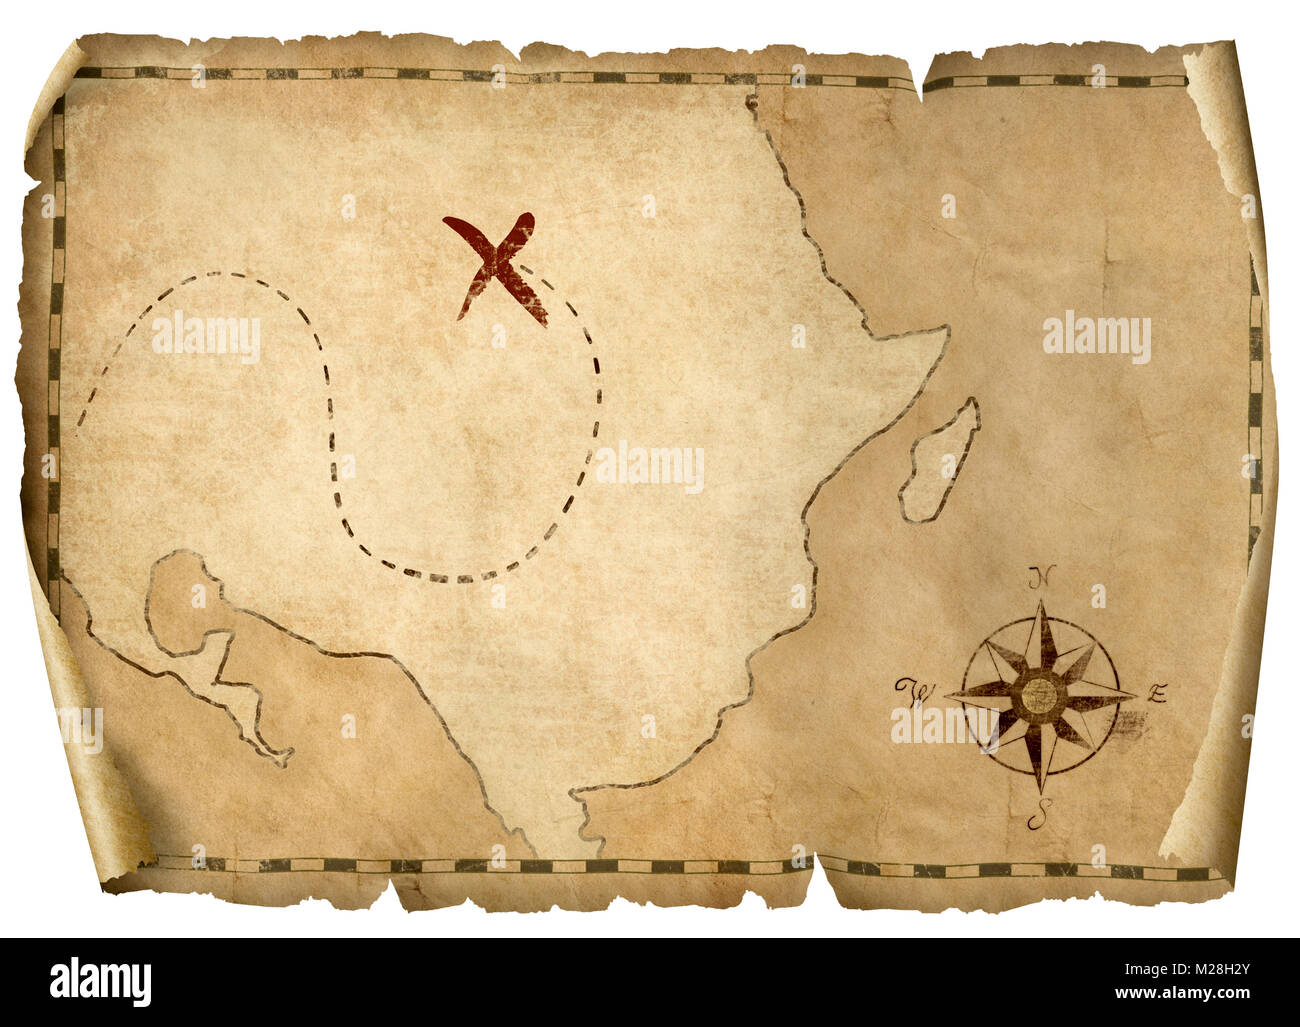 treasure pirates' old map isolated 3d illustration Stock Photo